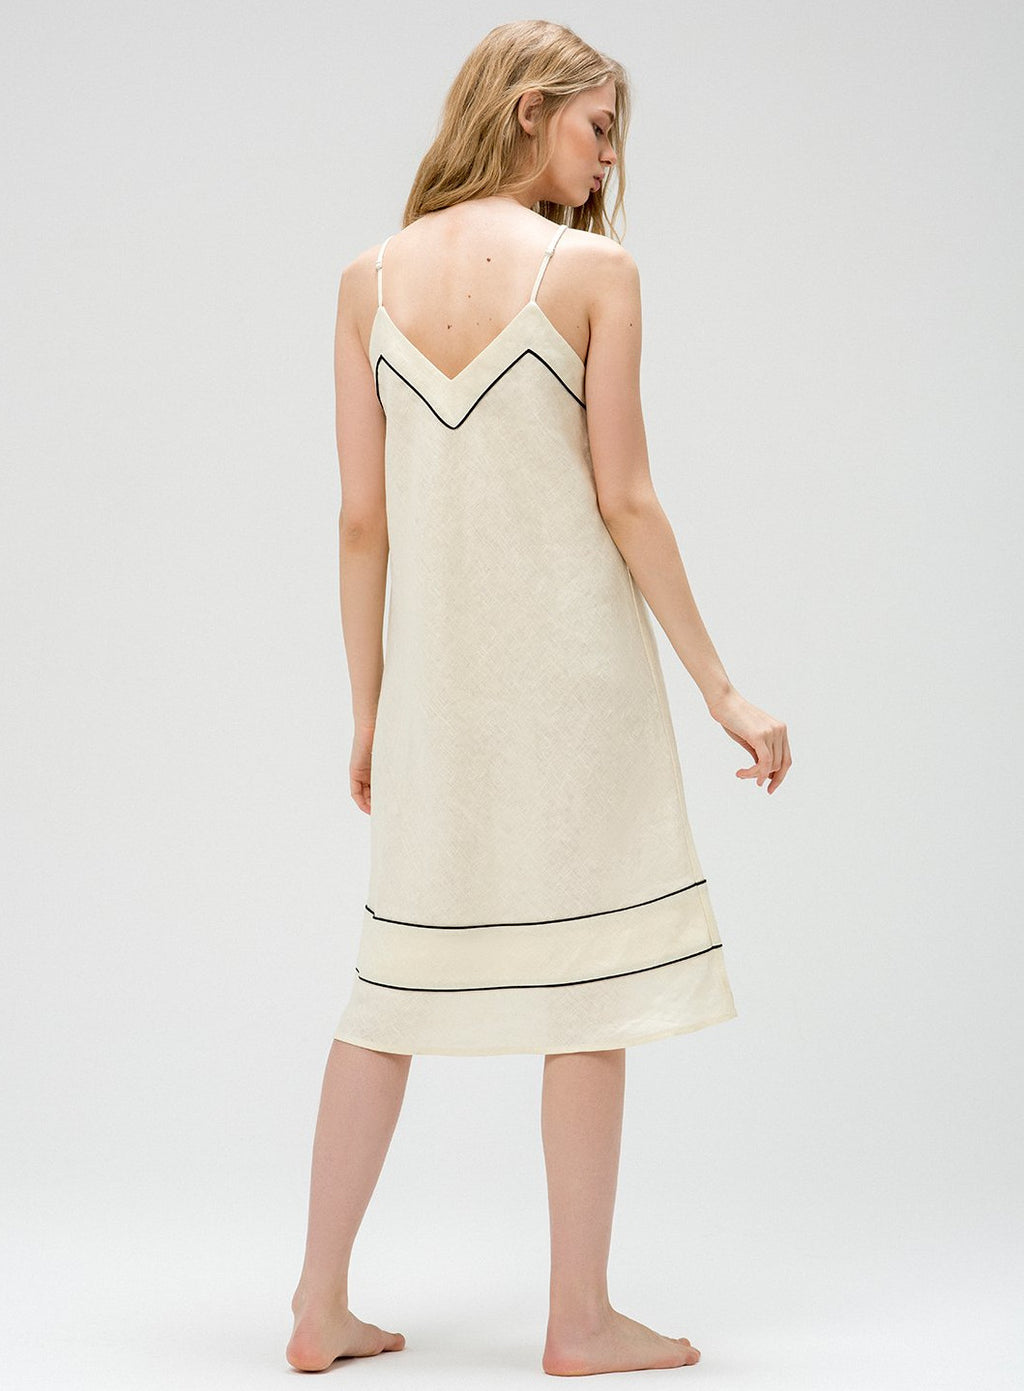 Belle White Dress with piping detailing